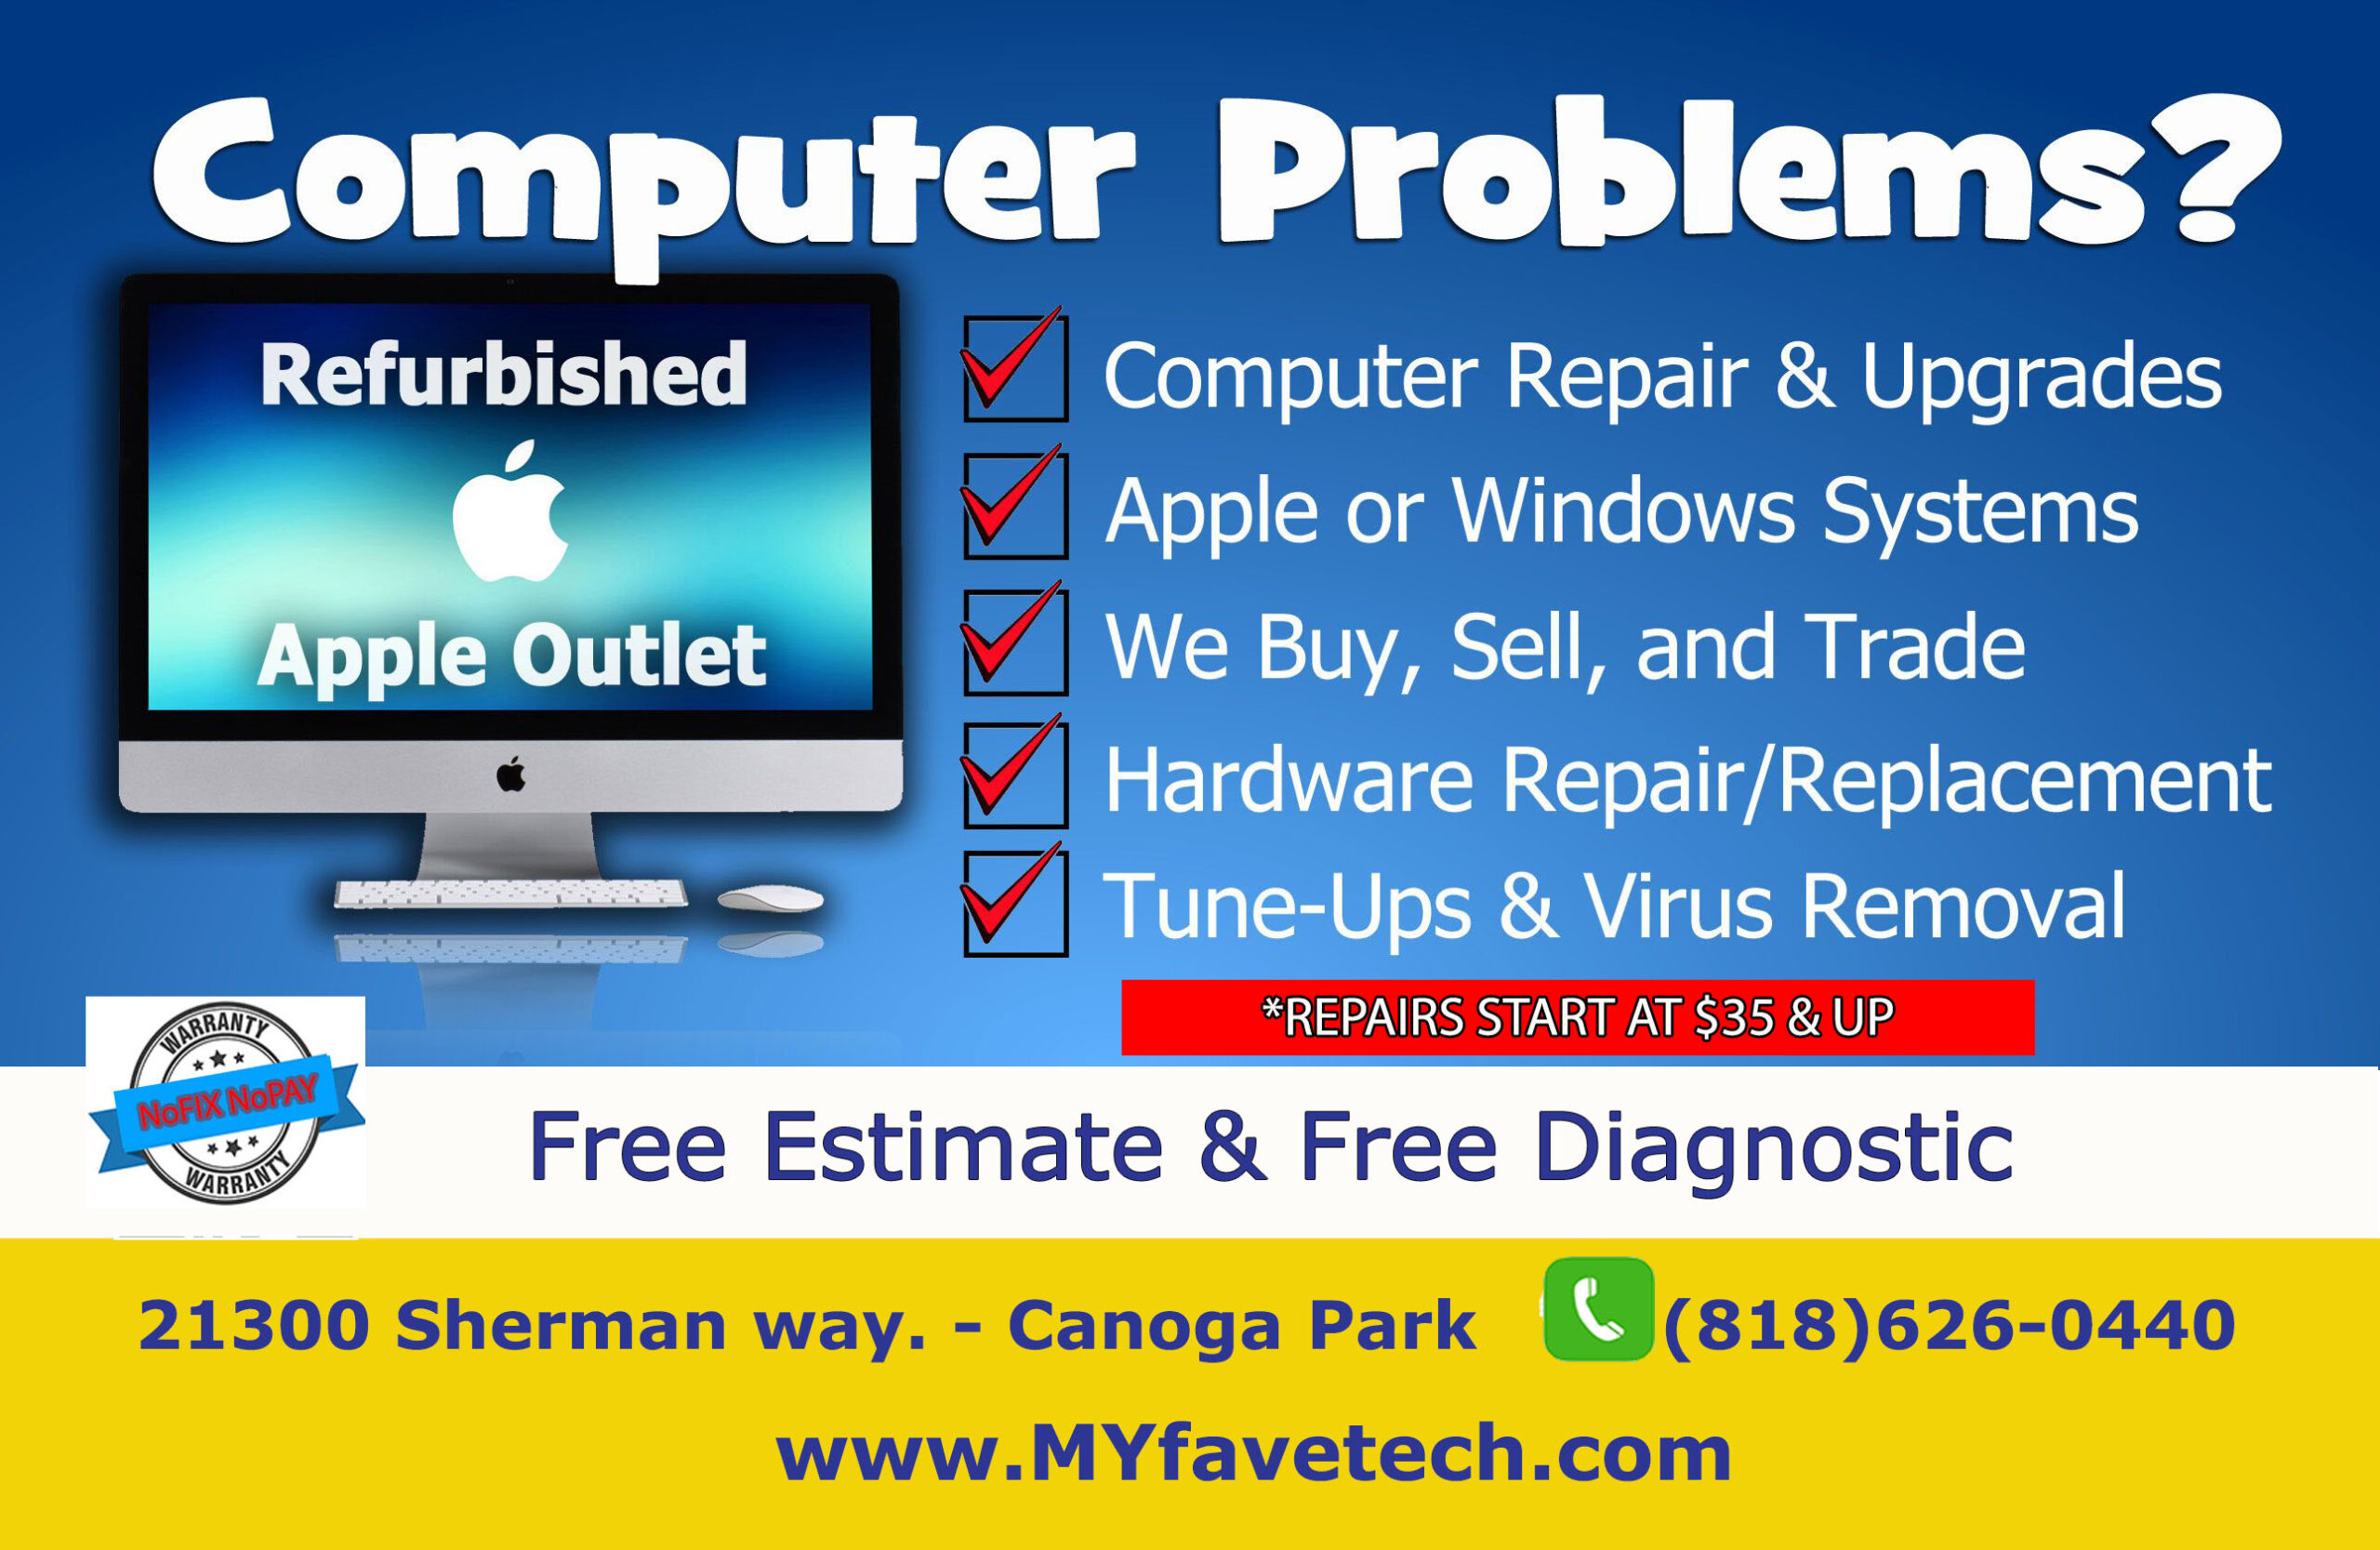 refurbished apple outlet - Computer Problems? computer repair & upgrades, Apple or Windows Systems. We buy, sell, and trade. Hardware Repair/Replacement, Tune-ups & Virus removal. *Repairs Start at $35 & up. Free estimate & Free diagnostic. 21300 Sherman Way #6 - Canoga Park (818)626-0440 www.myfavetech.com -Computer Repair Canoga Park 818*626*0440 NO FIX NO PAY